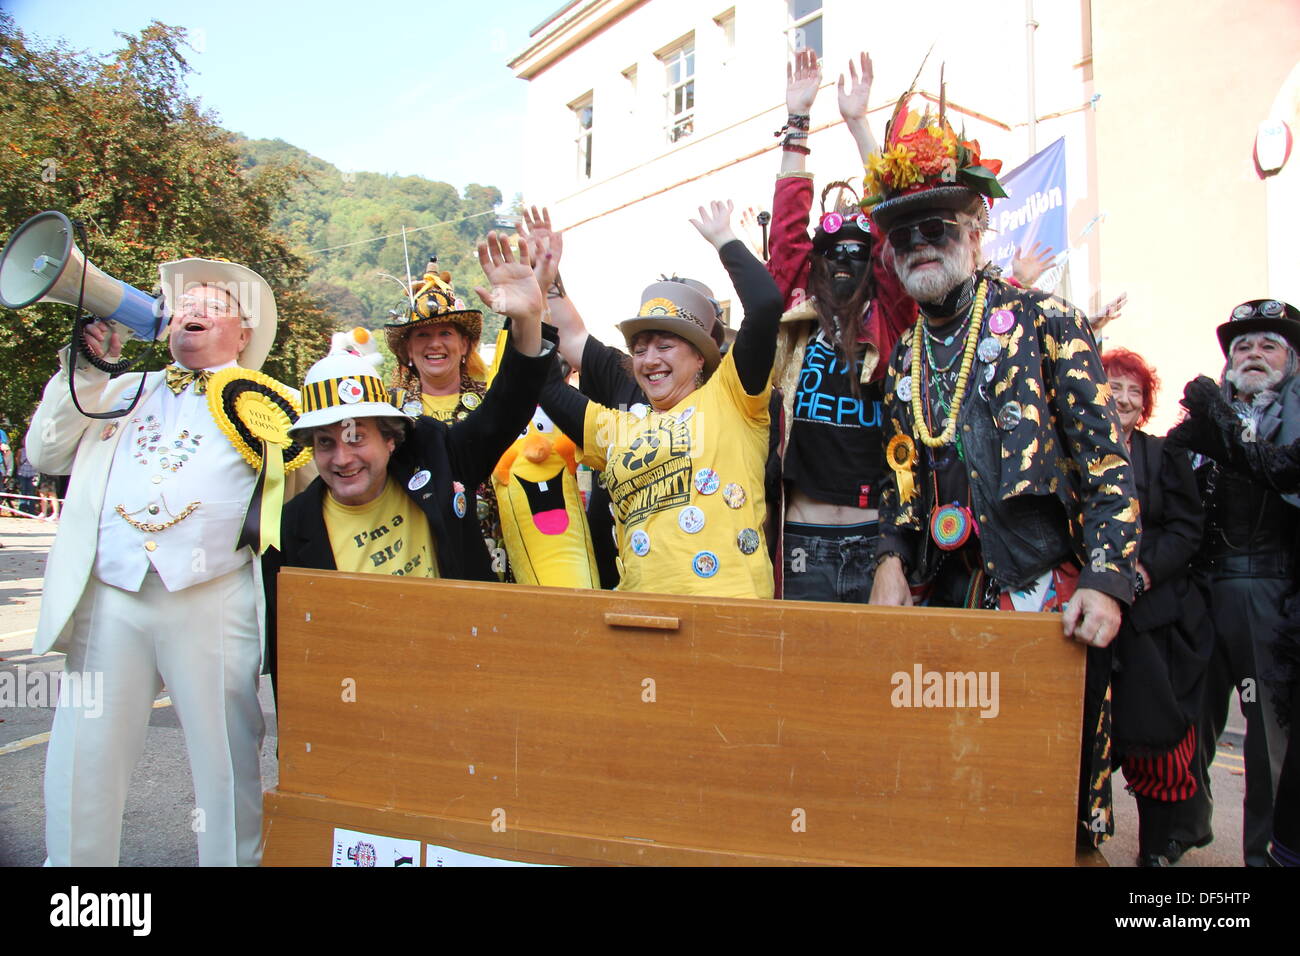 Derbyshire, UK. 28 Sept 2013. Party leader, Alan 'Howlin' Laud' Hope leads the cabinet re-shuffle of The Official Monster Raving Loony Party held at The Grand Pavilion in Matlock Bath, Derbyshire. The conference was held alongside the second annual Steampunk Illuminati event. Party members, steampunks and members of the Black Pig Border Morris dancers took part in the re-shuffle. Credit:  Deborah Vernon/Alamy Live News Stock Photo